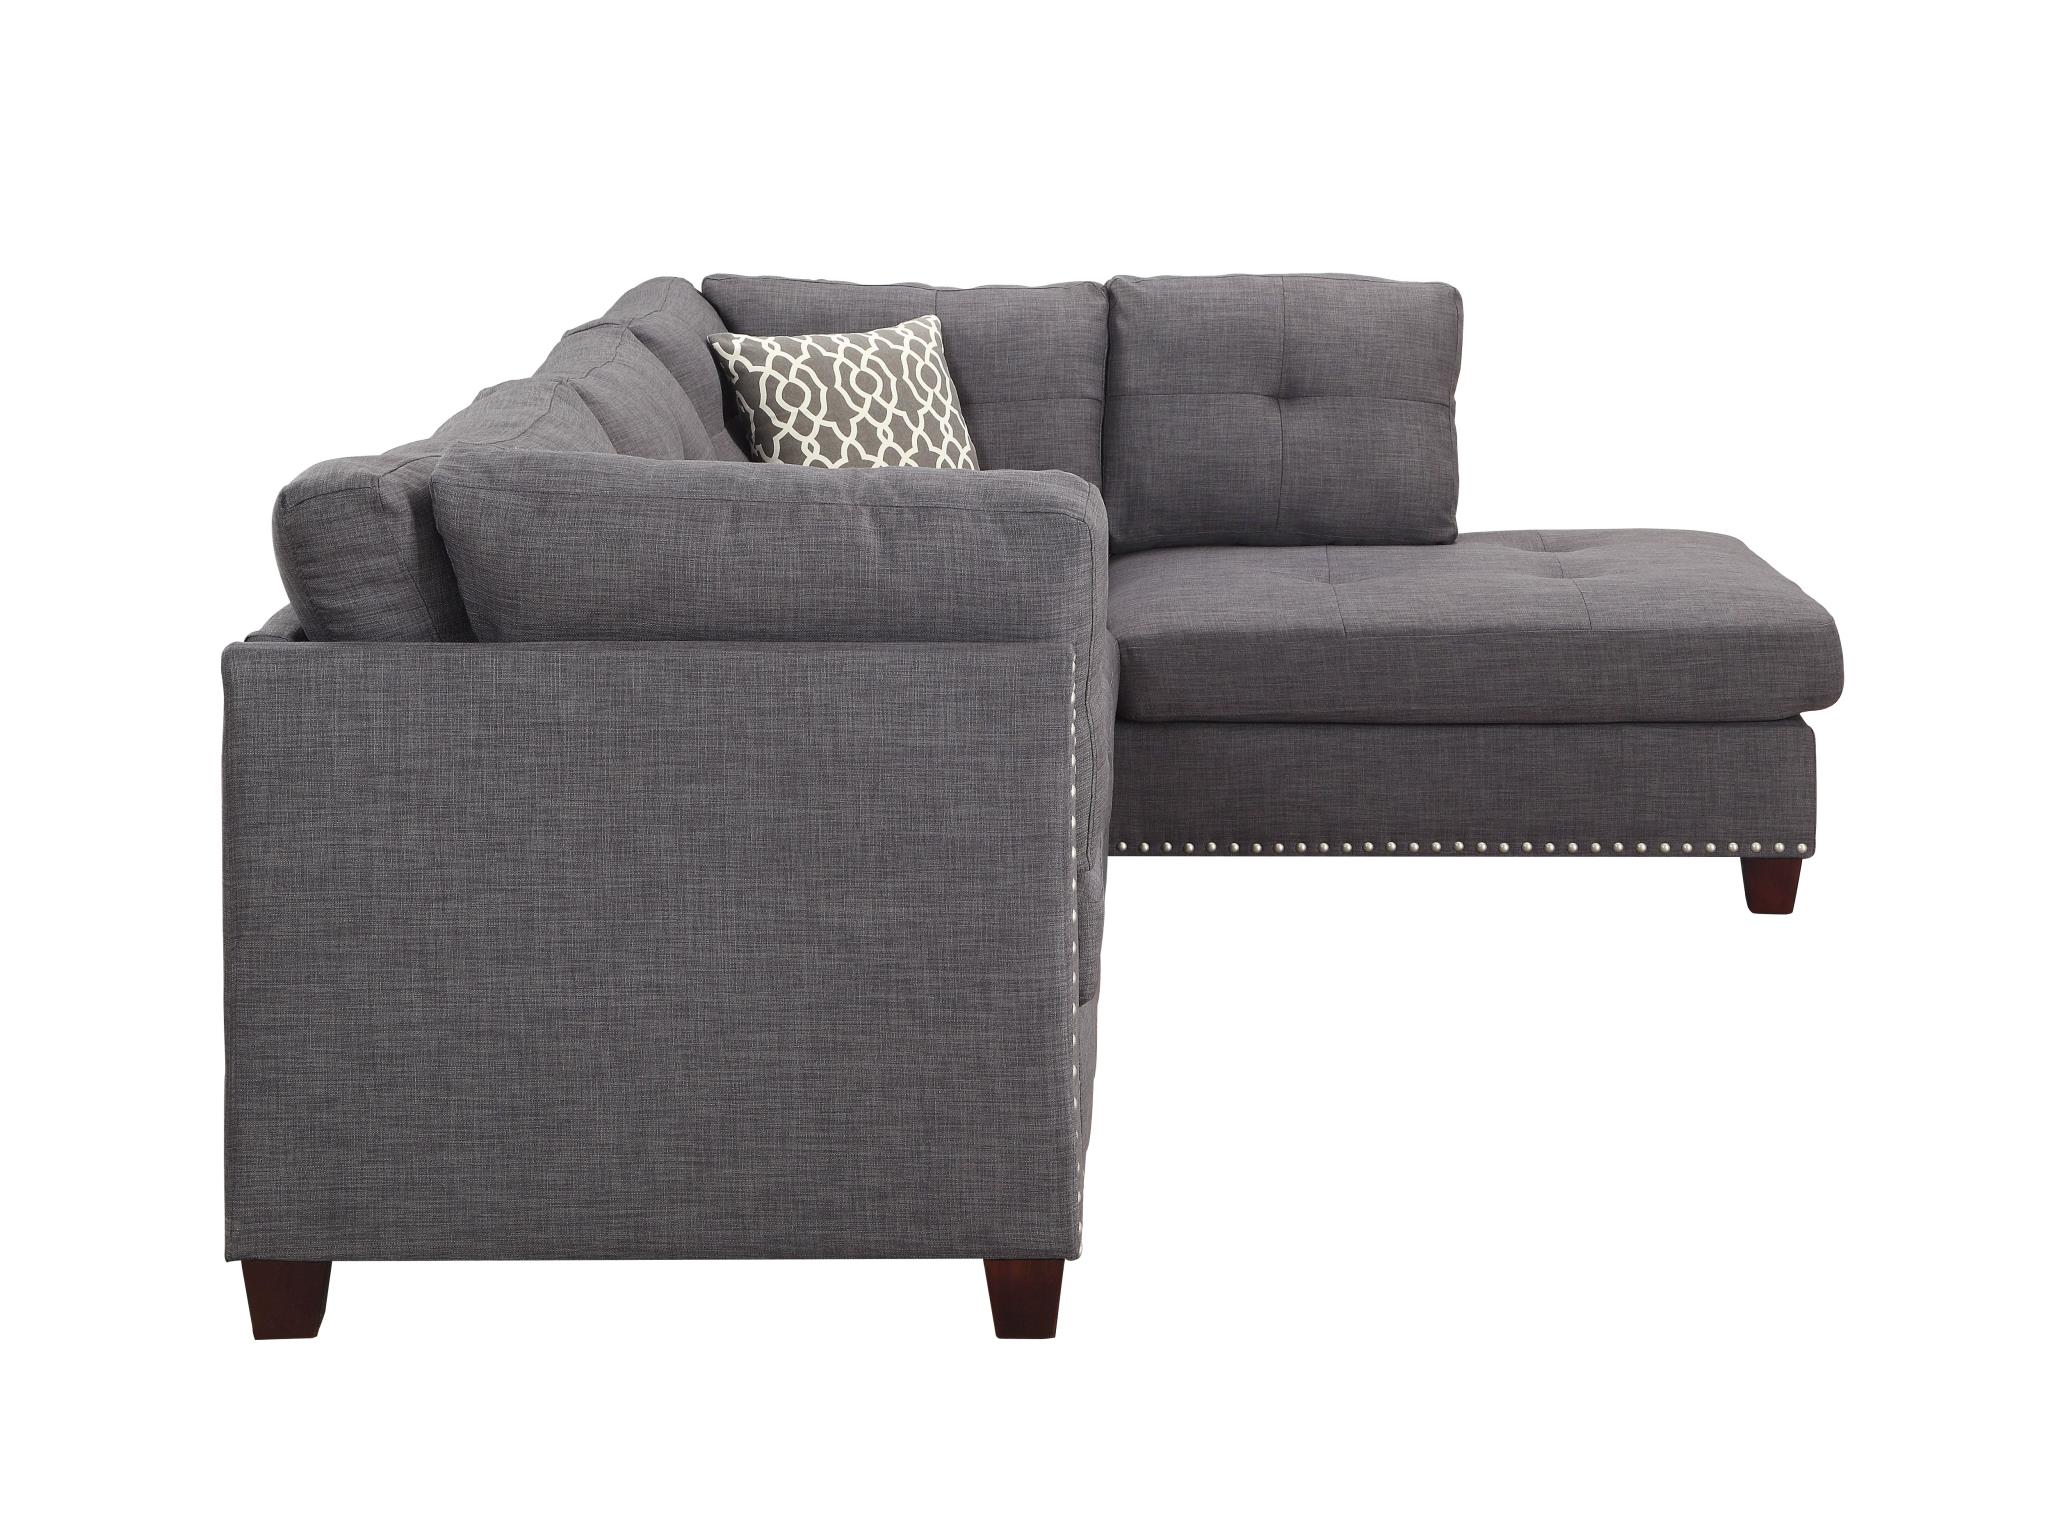 Sectional Sofa w/ Right Facing Chaise Side